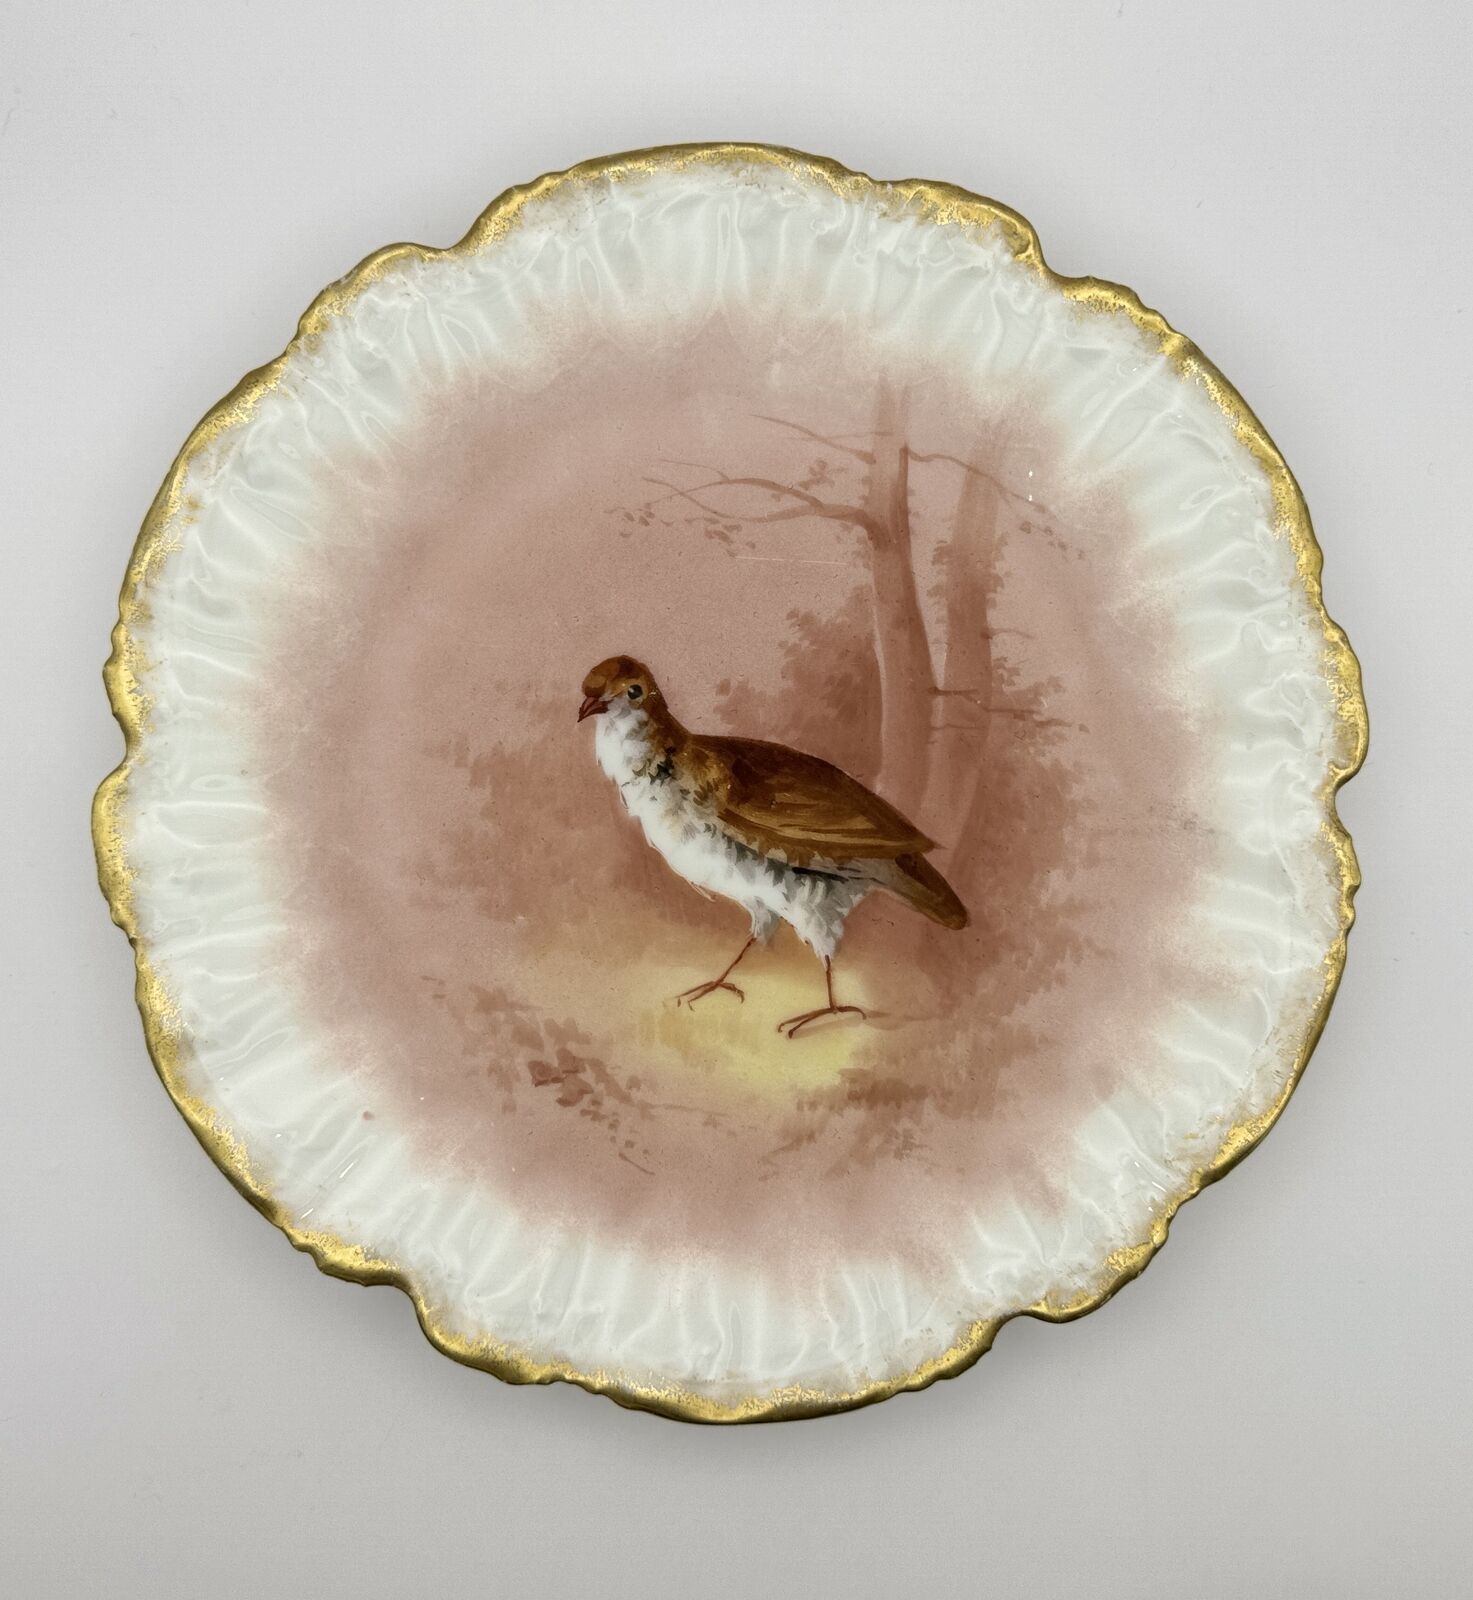 Stunning Limoges France Hand-Painted Partridge Bird Plate with Gold Trim